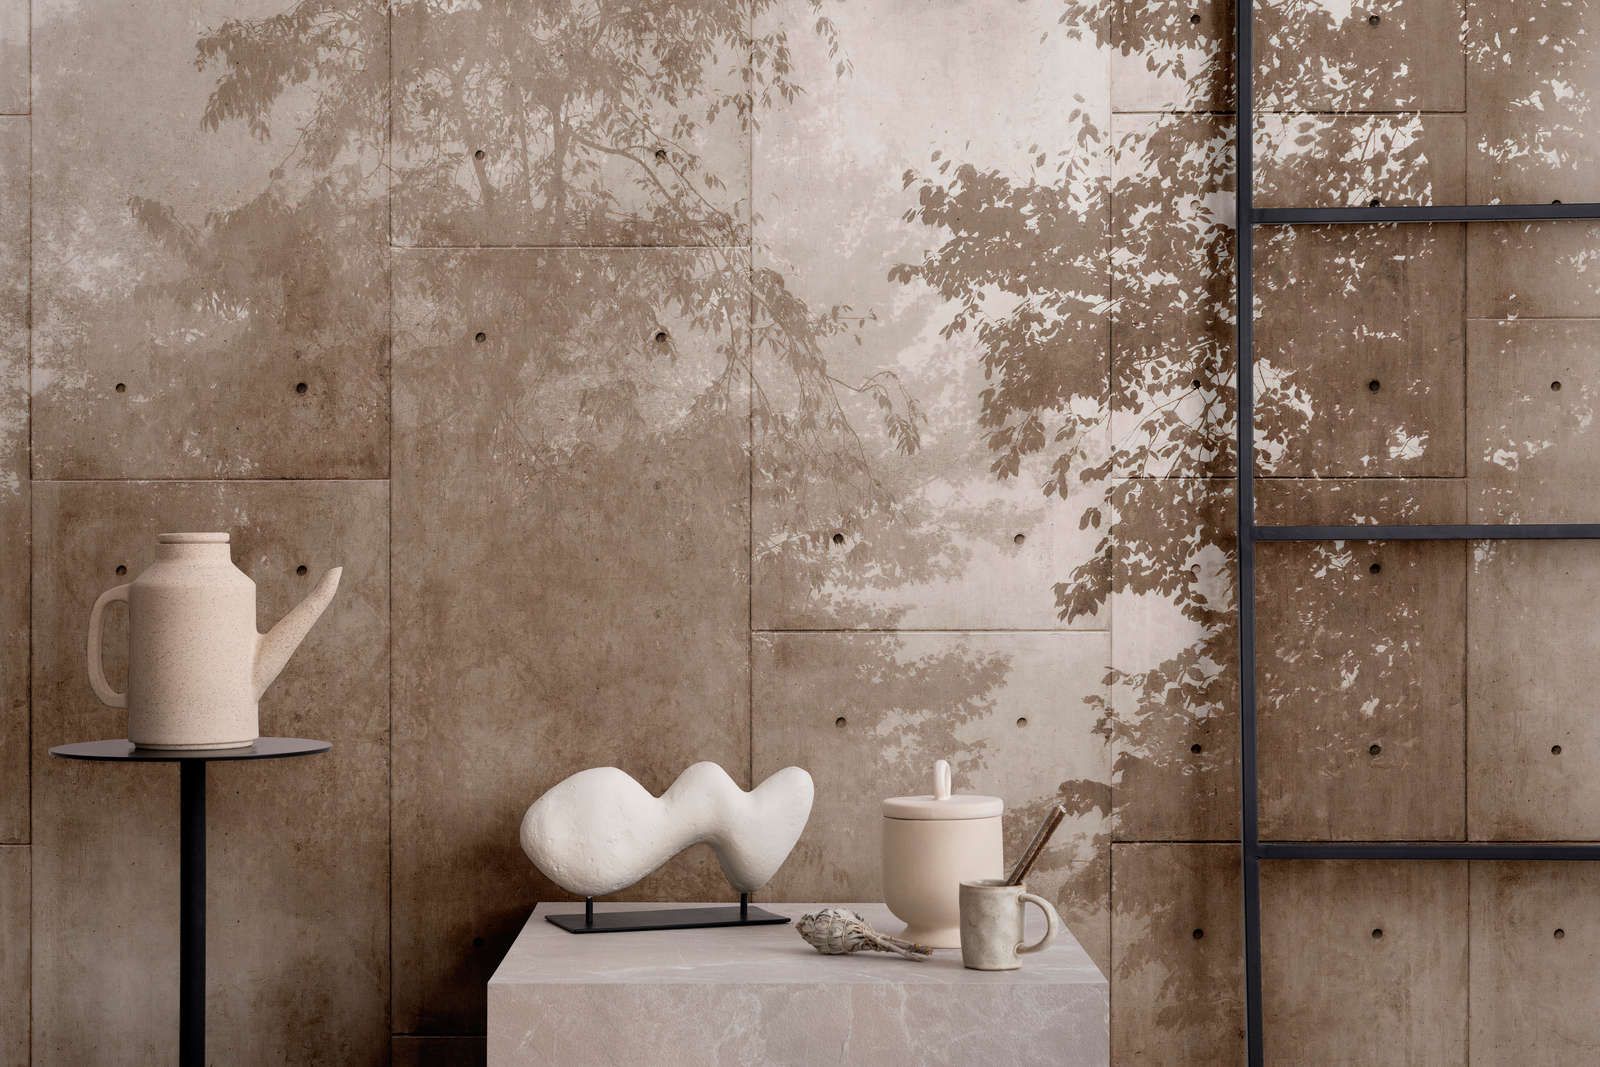             Photo wallpaper »mytho« - Treetops on concrete slabs - Smooth, slightly pearlescent non-woven fabric
        